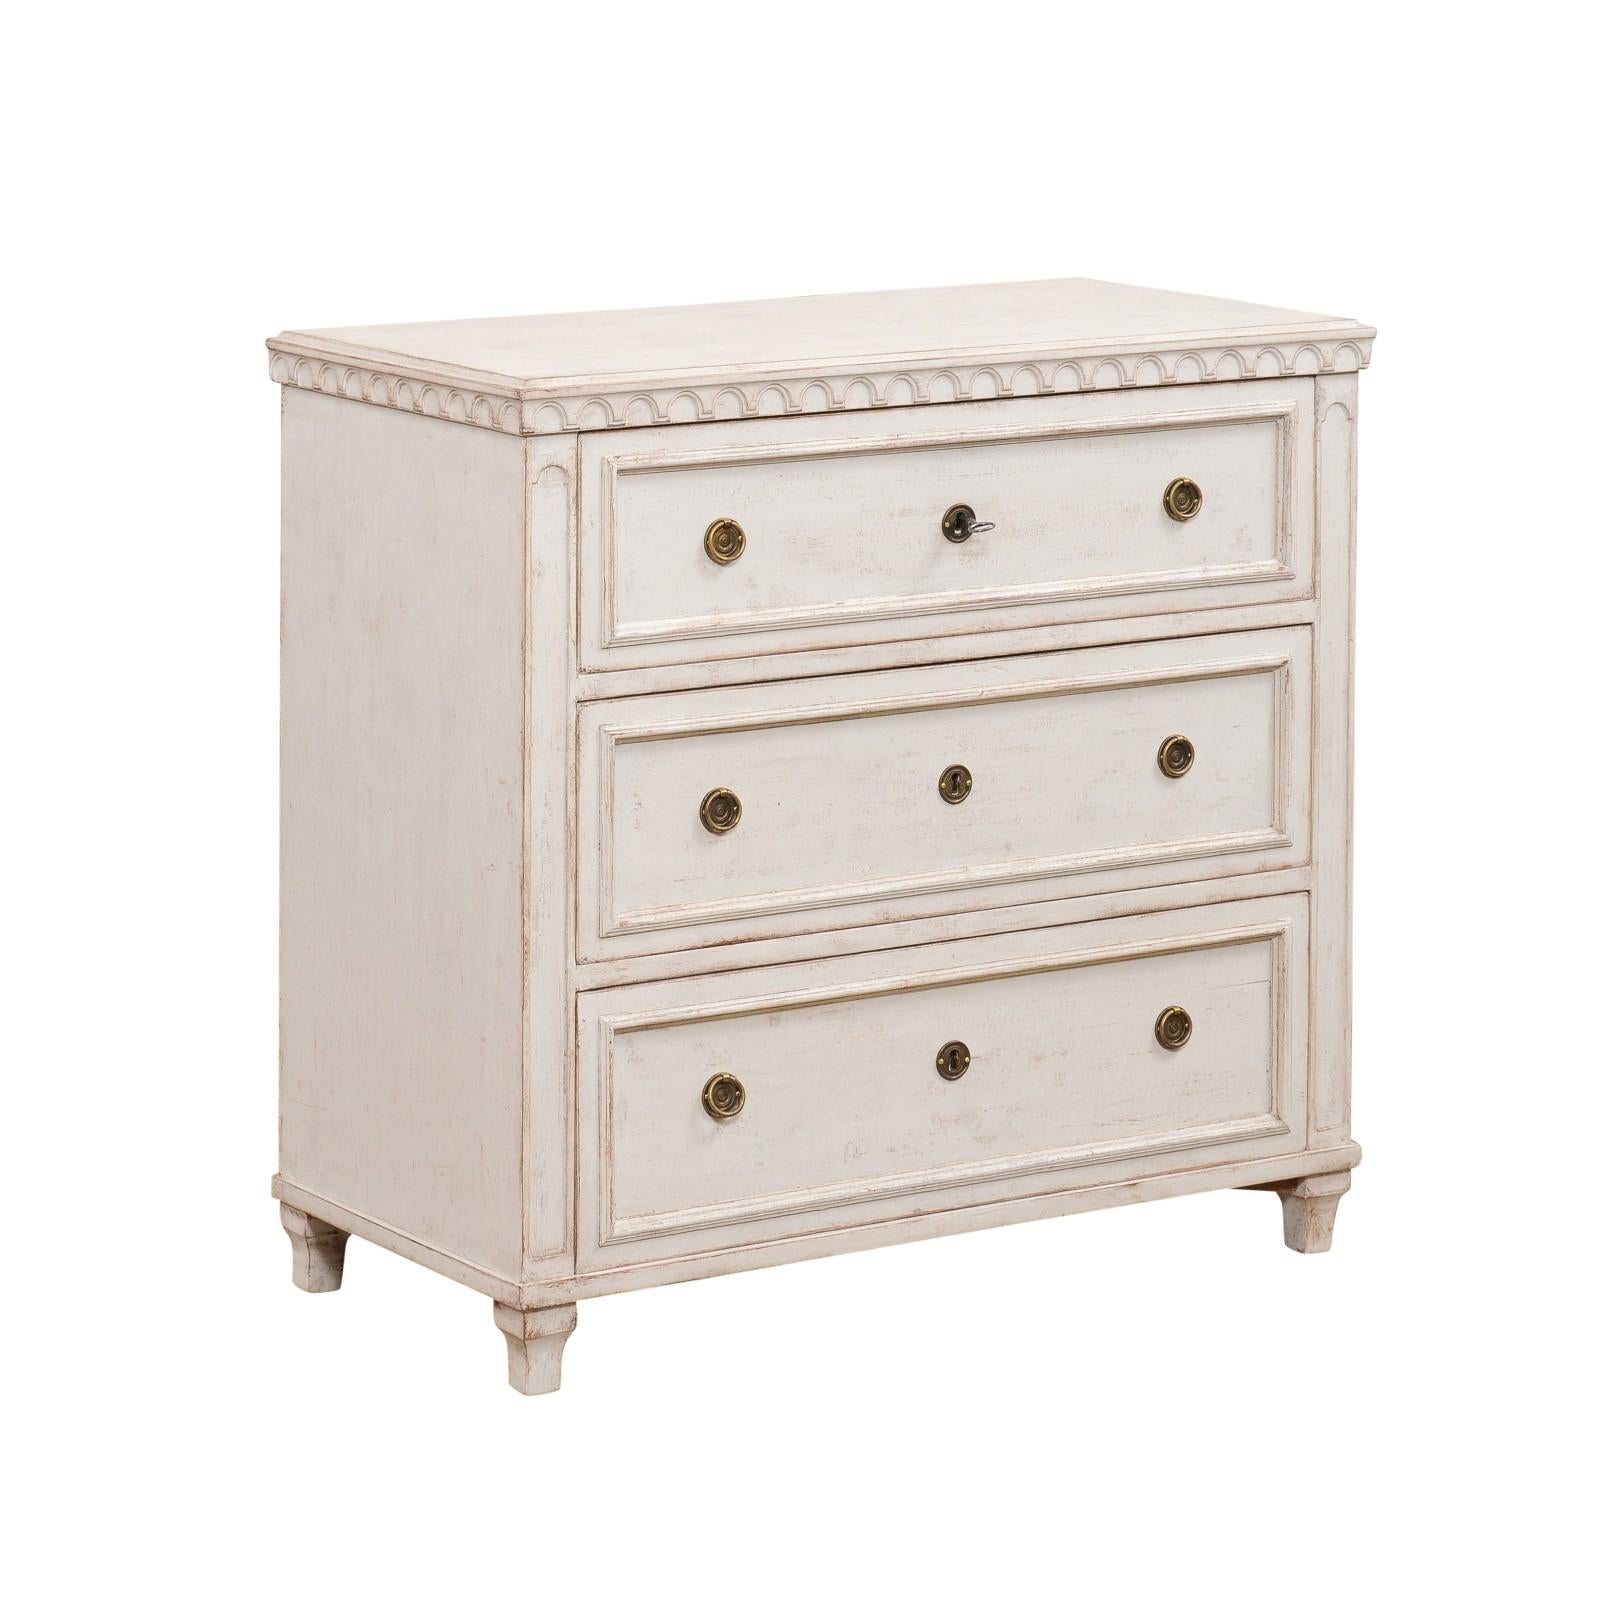 A Swedish Gustavian style painted wood chest from the late 19th century, with three graduated drawers, carved motifs and brass hardware. Created in Sweden during the last decade of the 19th century, this three-drawer chest showcases the stylistic